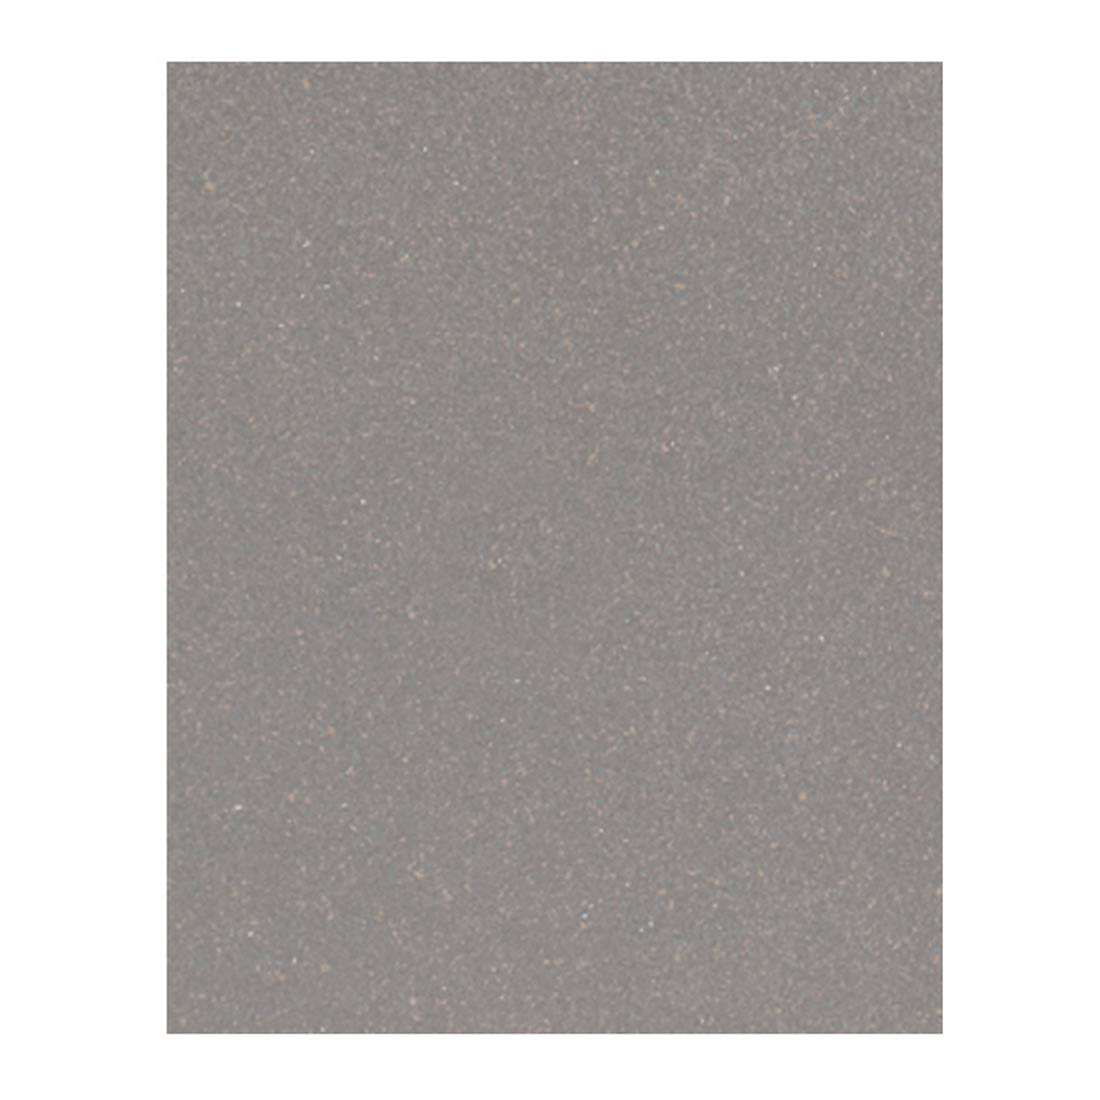 superstone 24 inch x 30 inch rectangular table top in dove grey product image